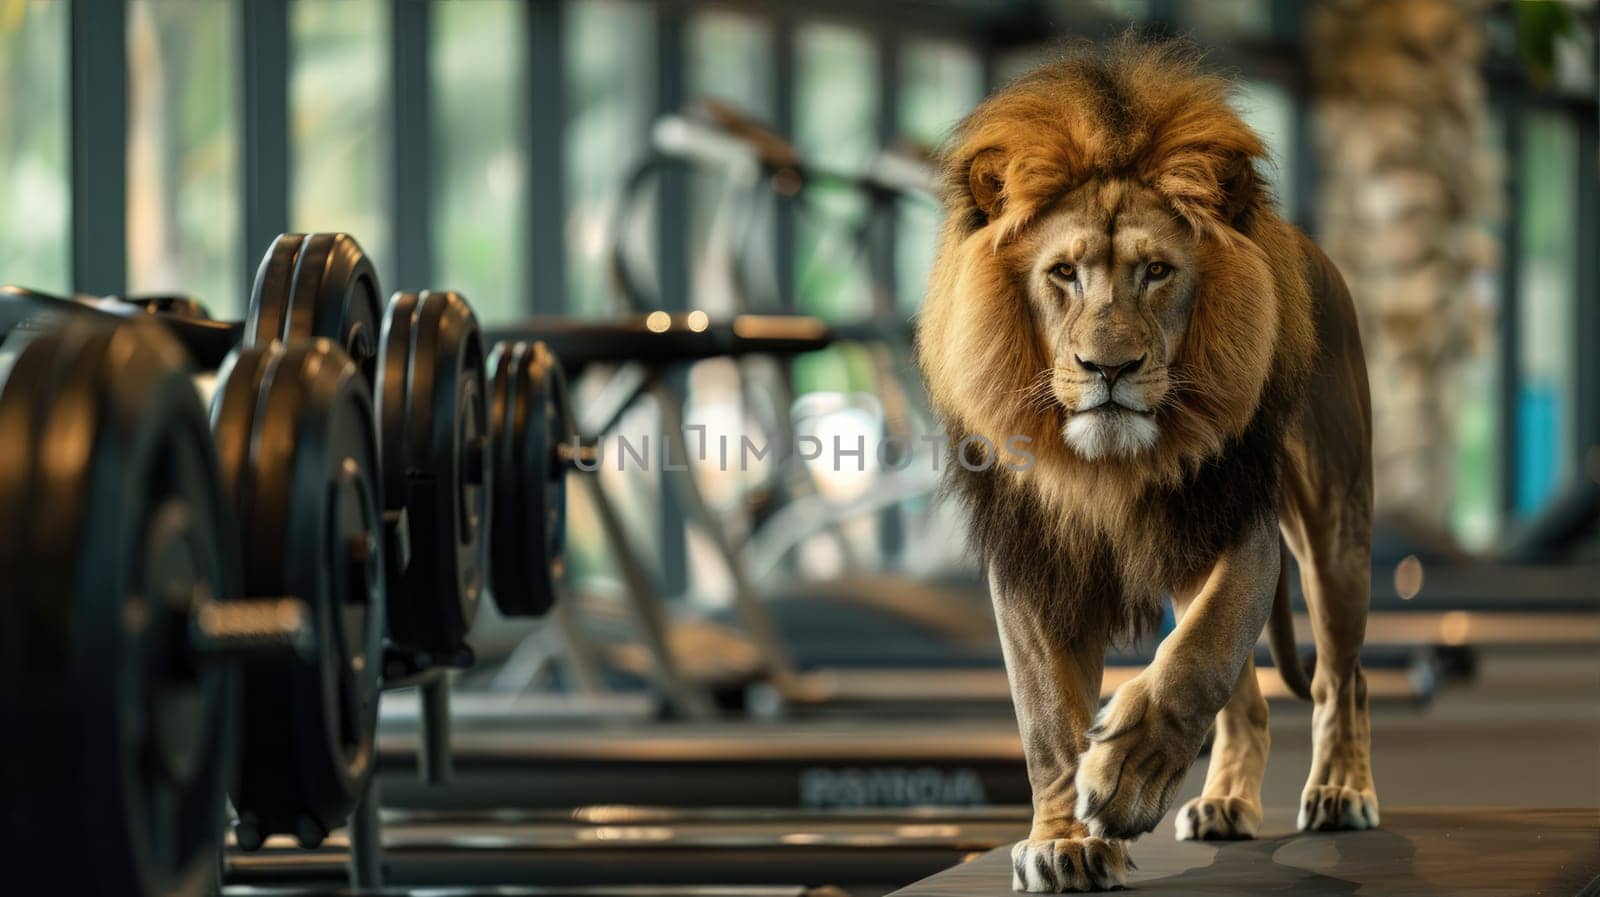 Lion in a gym surrounded by metal equipment by natali_brill